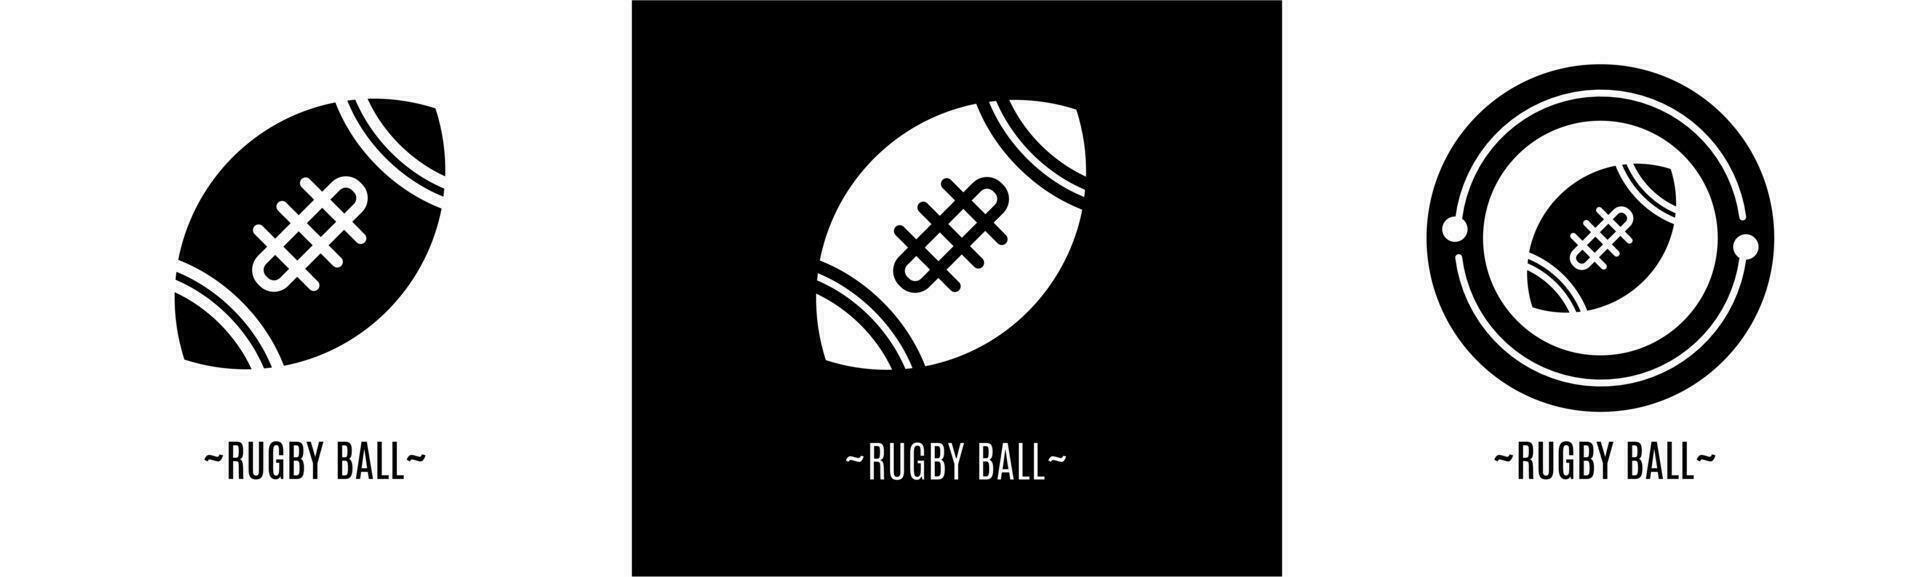 Rugby ball logo set. Collection of black and white logos. Stock vector. vector